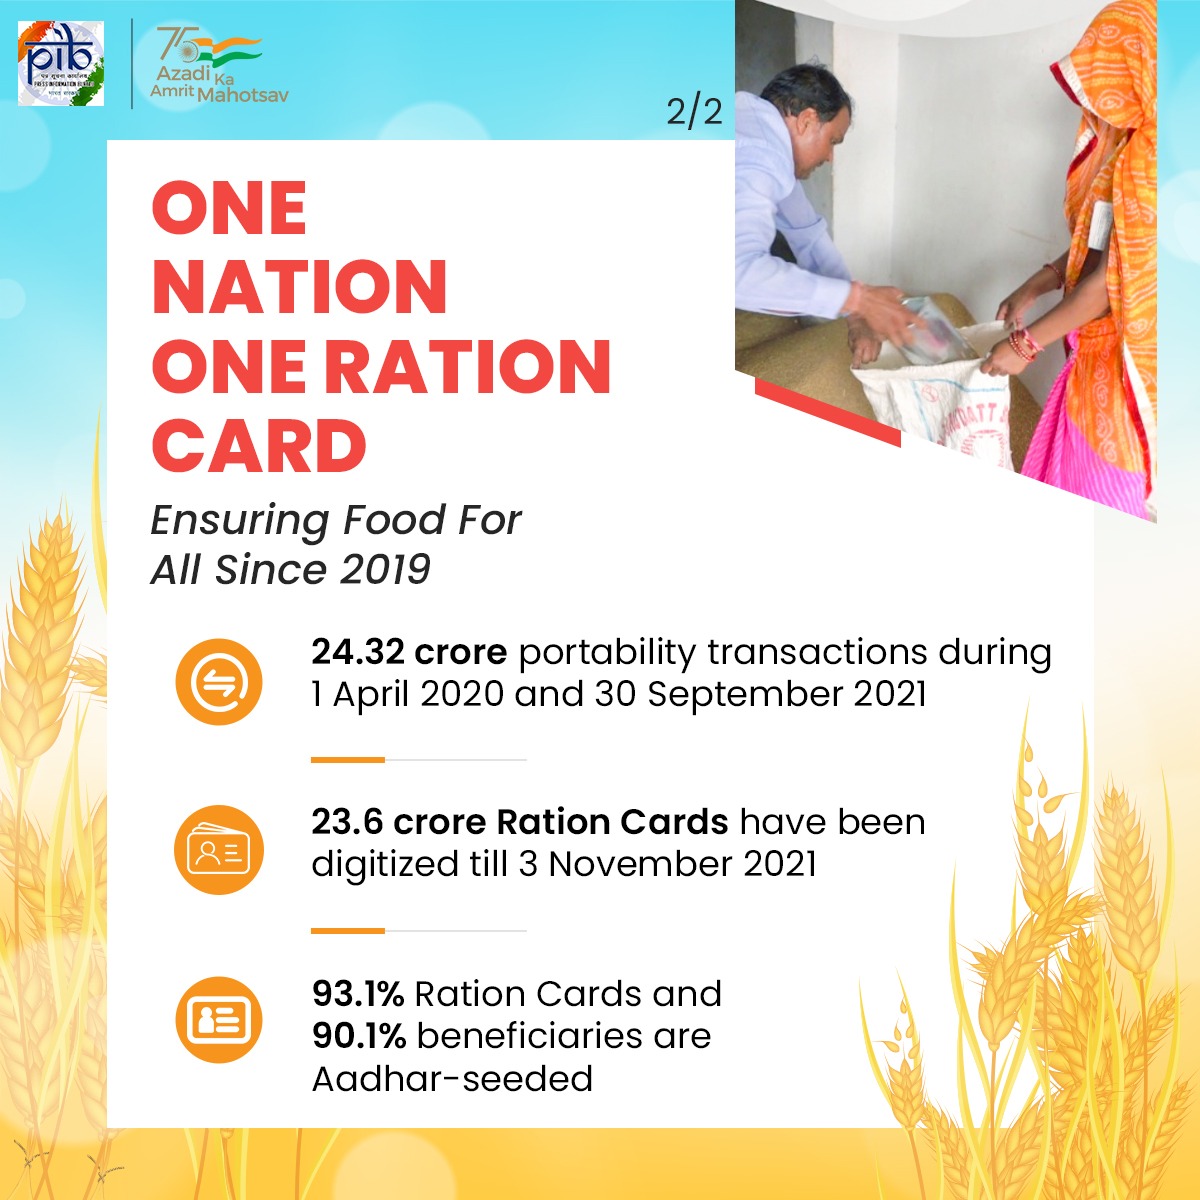 One Nation, One Ration Card 🔶24.32 crore portability transactions during 1 April 2020 and 30 September 2021 🔶23.6 crore Ration cards have been digitized till 3 November 2021 🔶93.1% Ration Cards and 90.1% beneficiaries are Aadhar-seeded